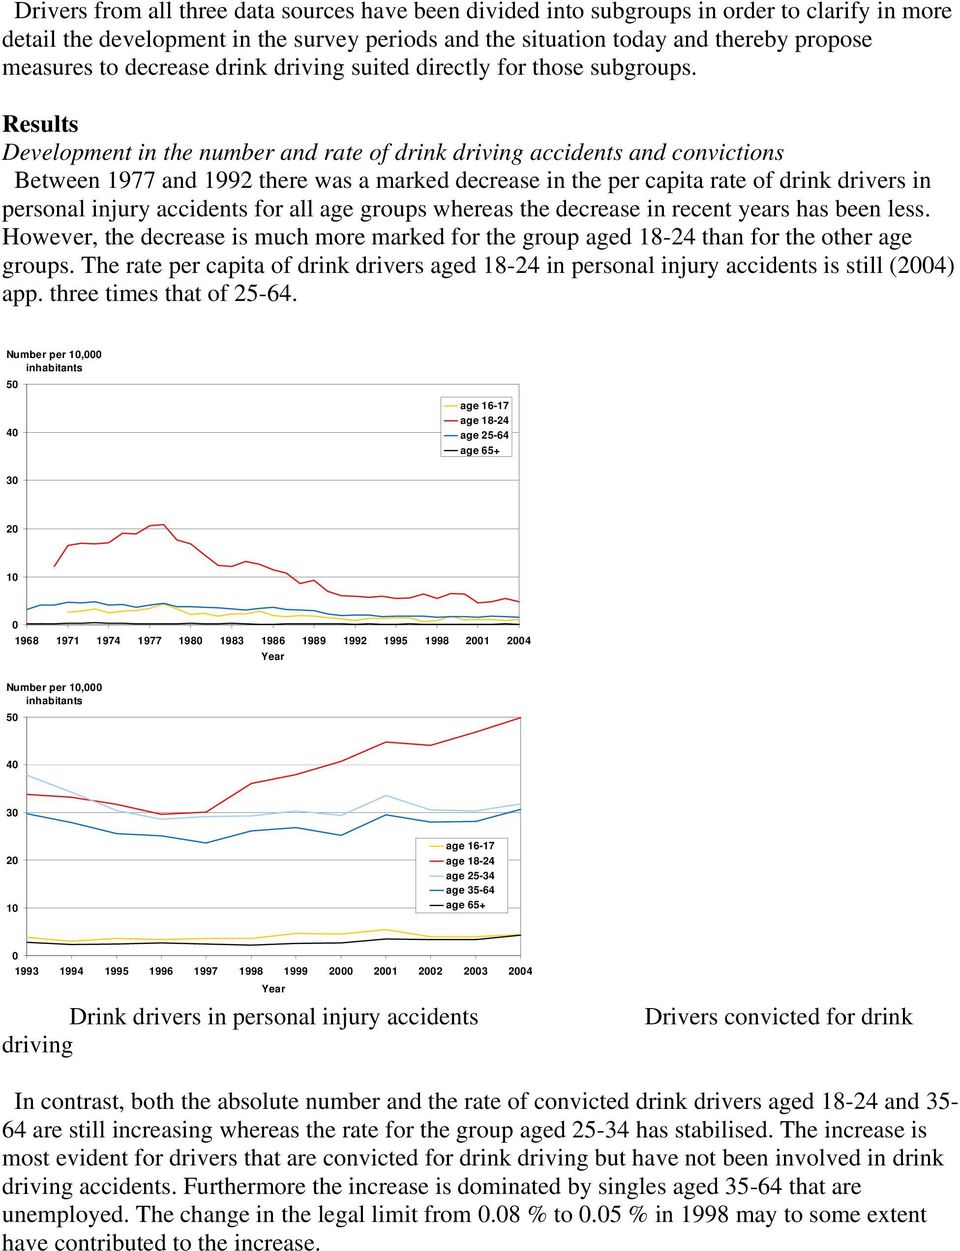 Results Development in the number and rate of drink driving accidents and convictions Between 1977 and 1992 there was a marked decrease in the per capita rate of drink drivers in personal injury